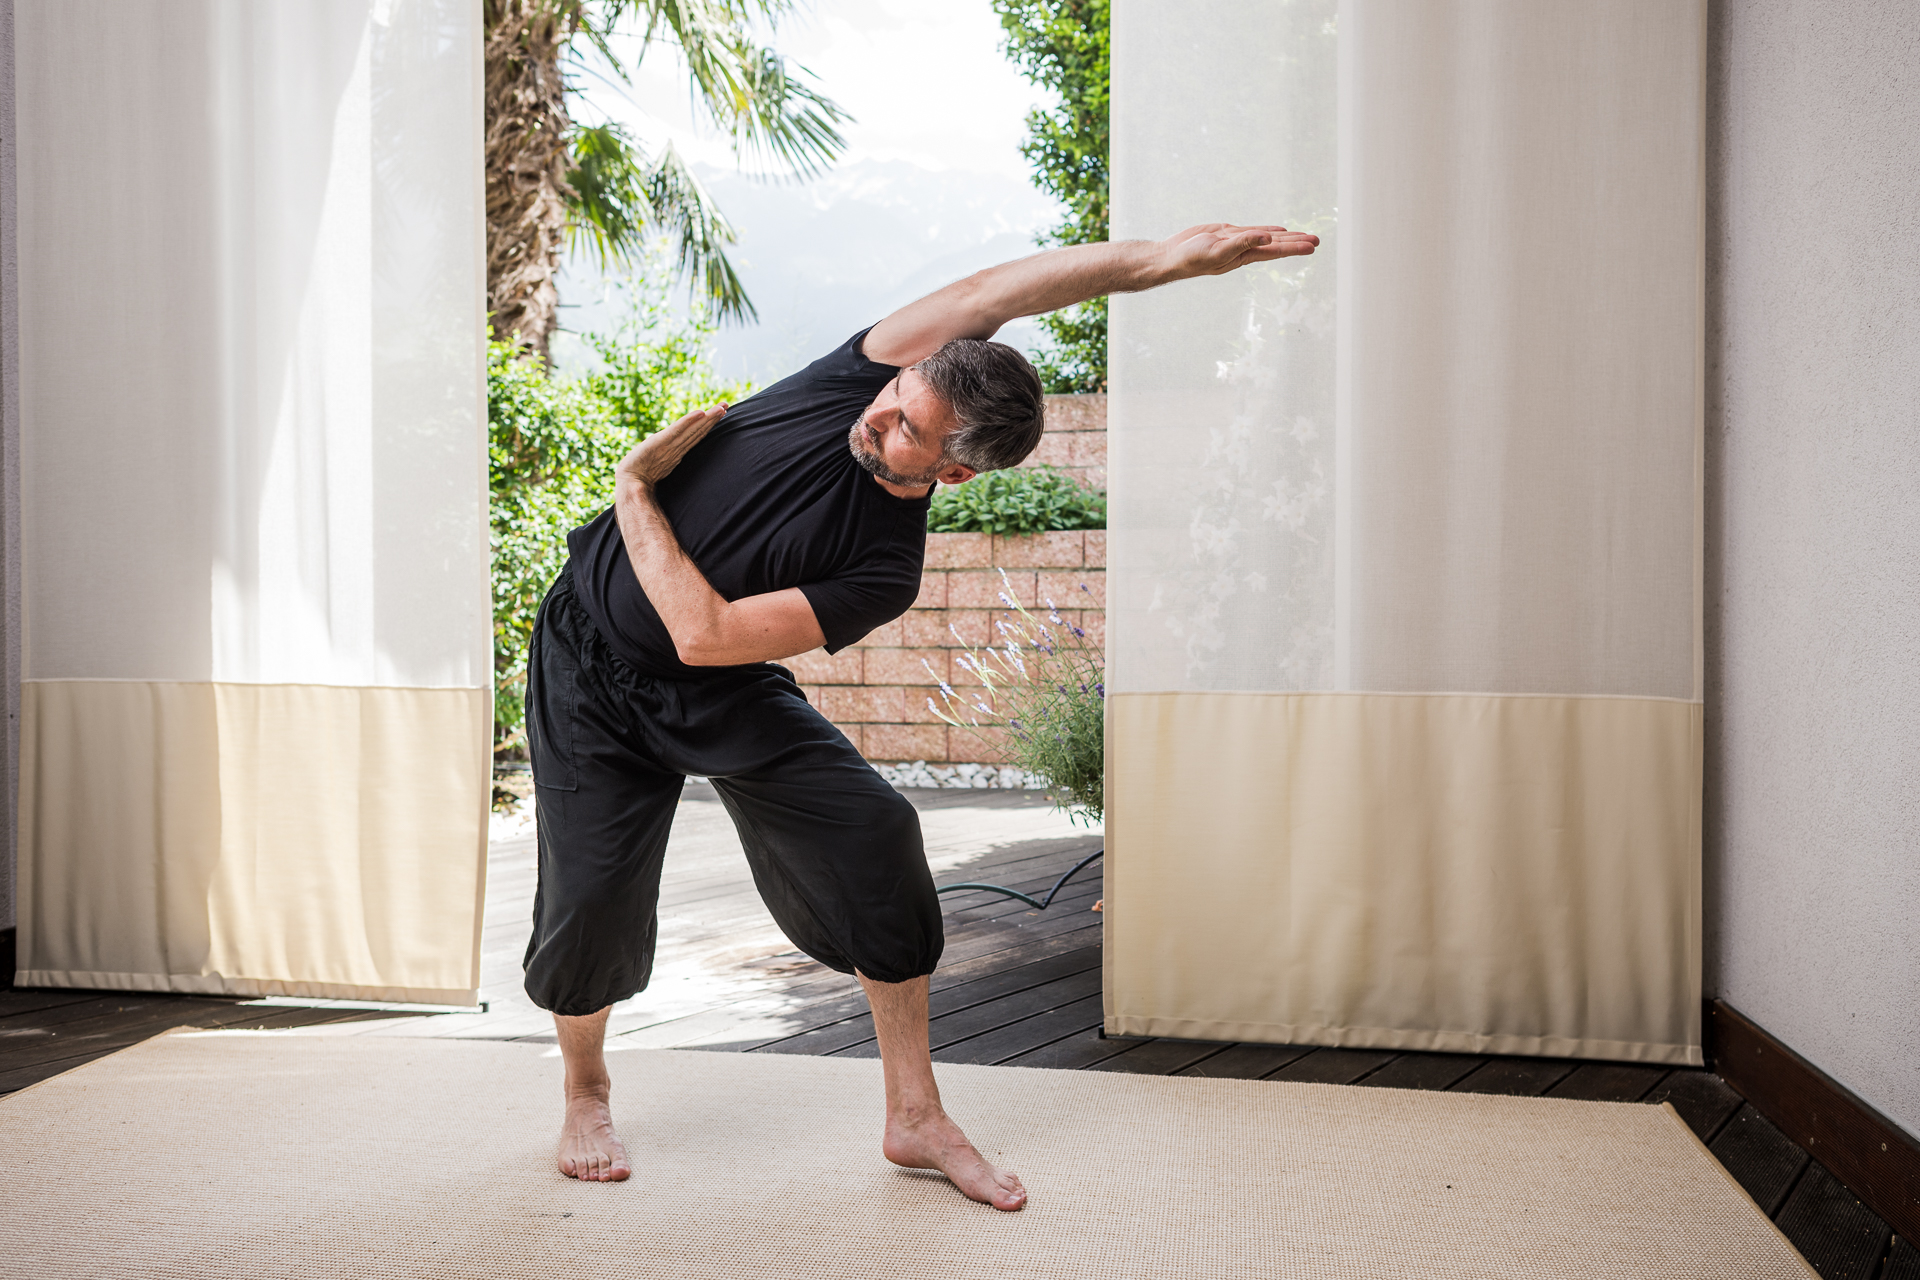 special movement classes offered by Preidlhof